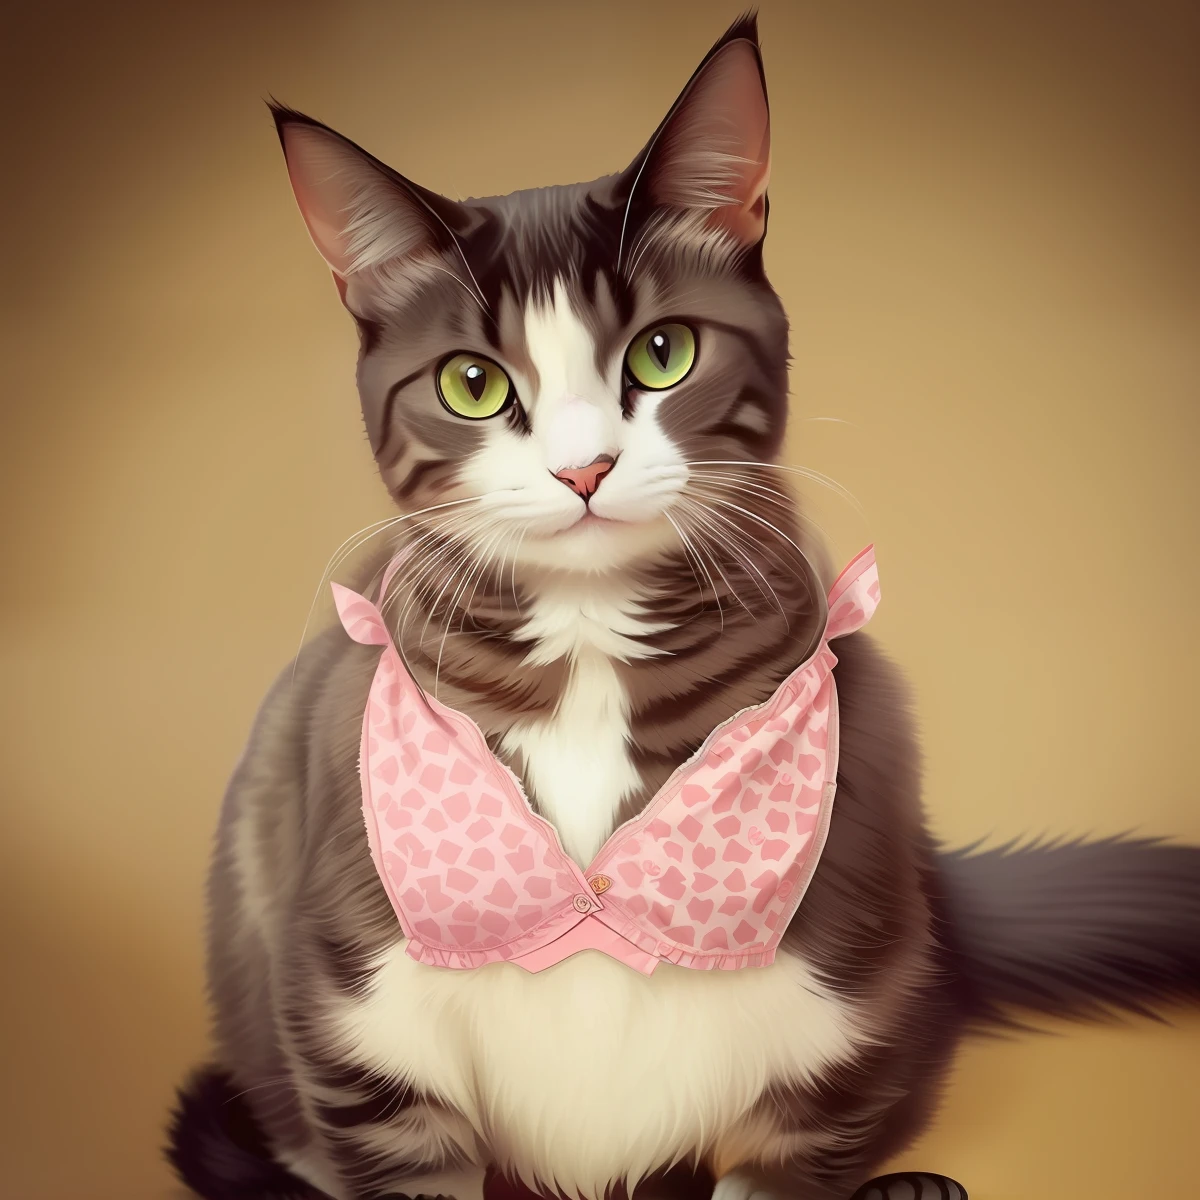 there is a cat that is wearing a pink and white bra, would you let